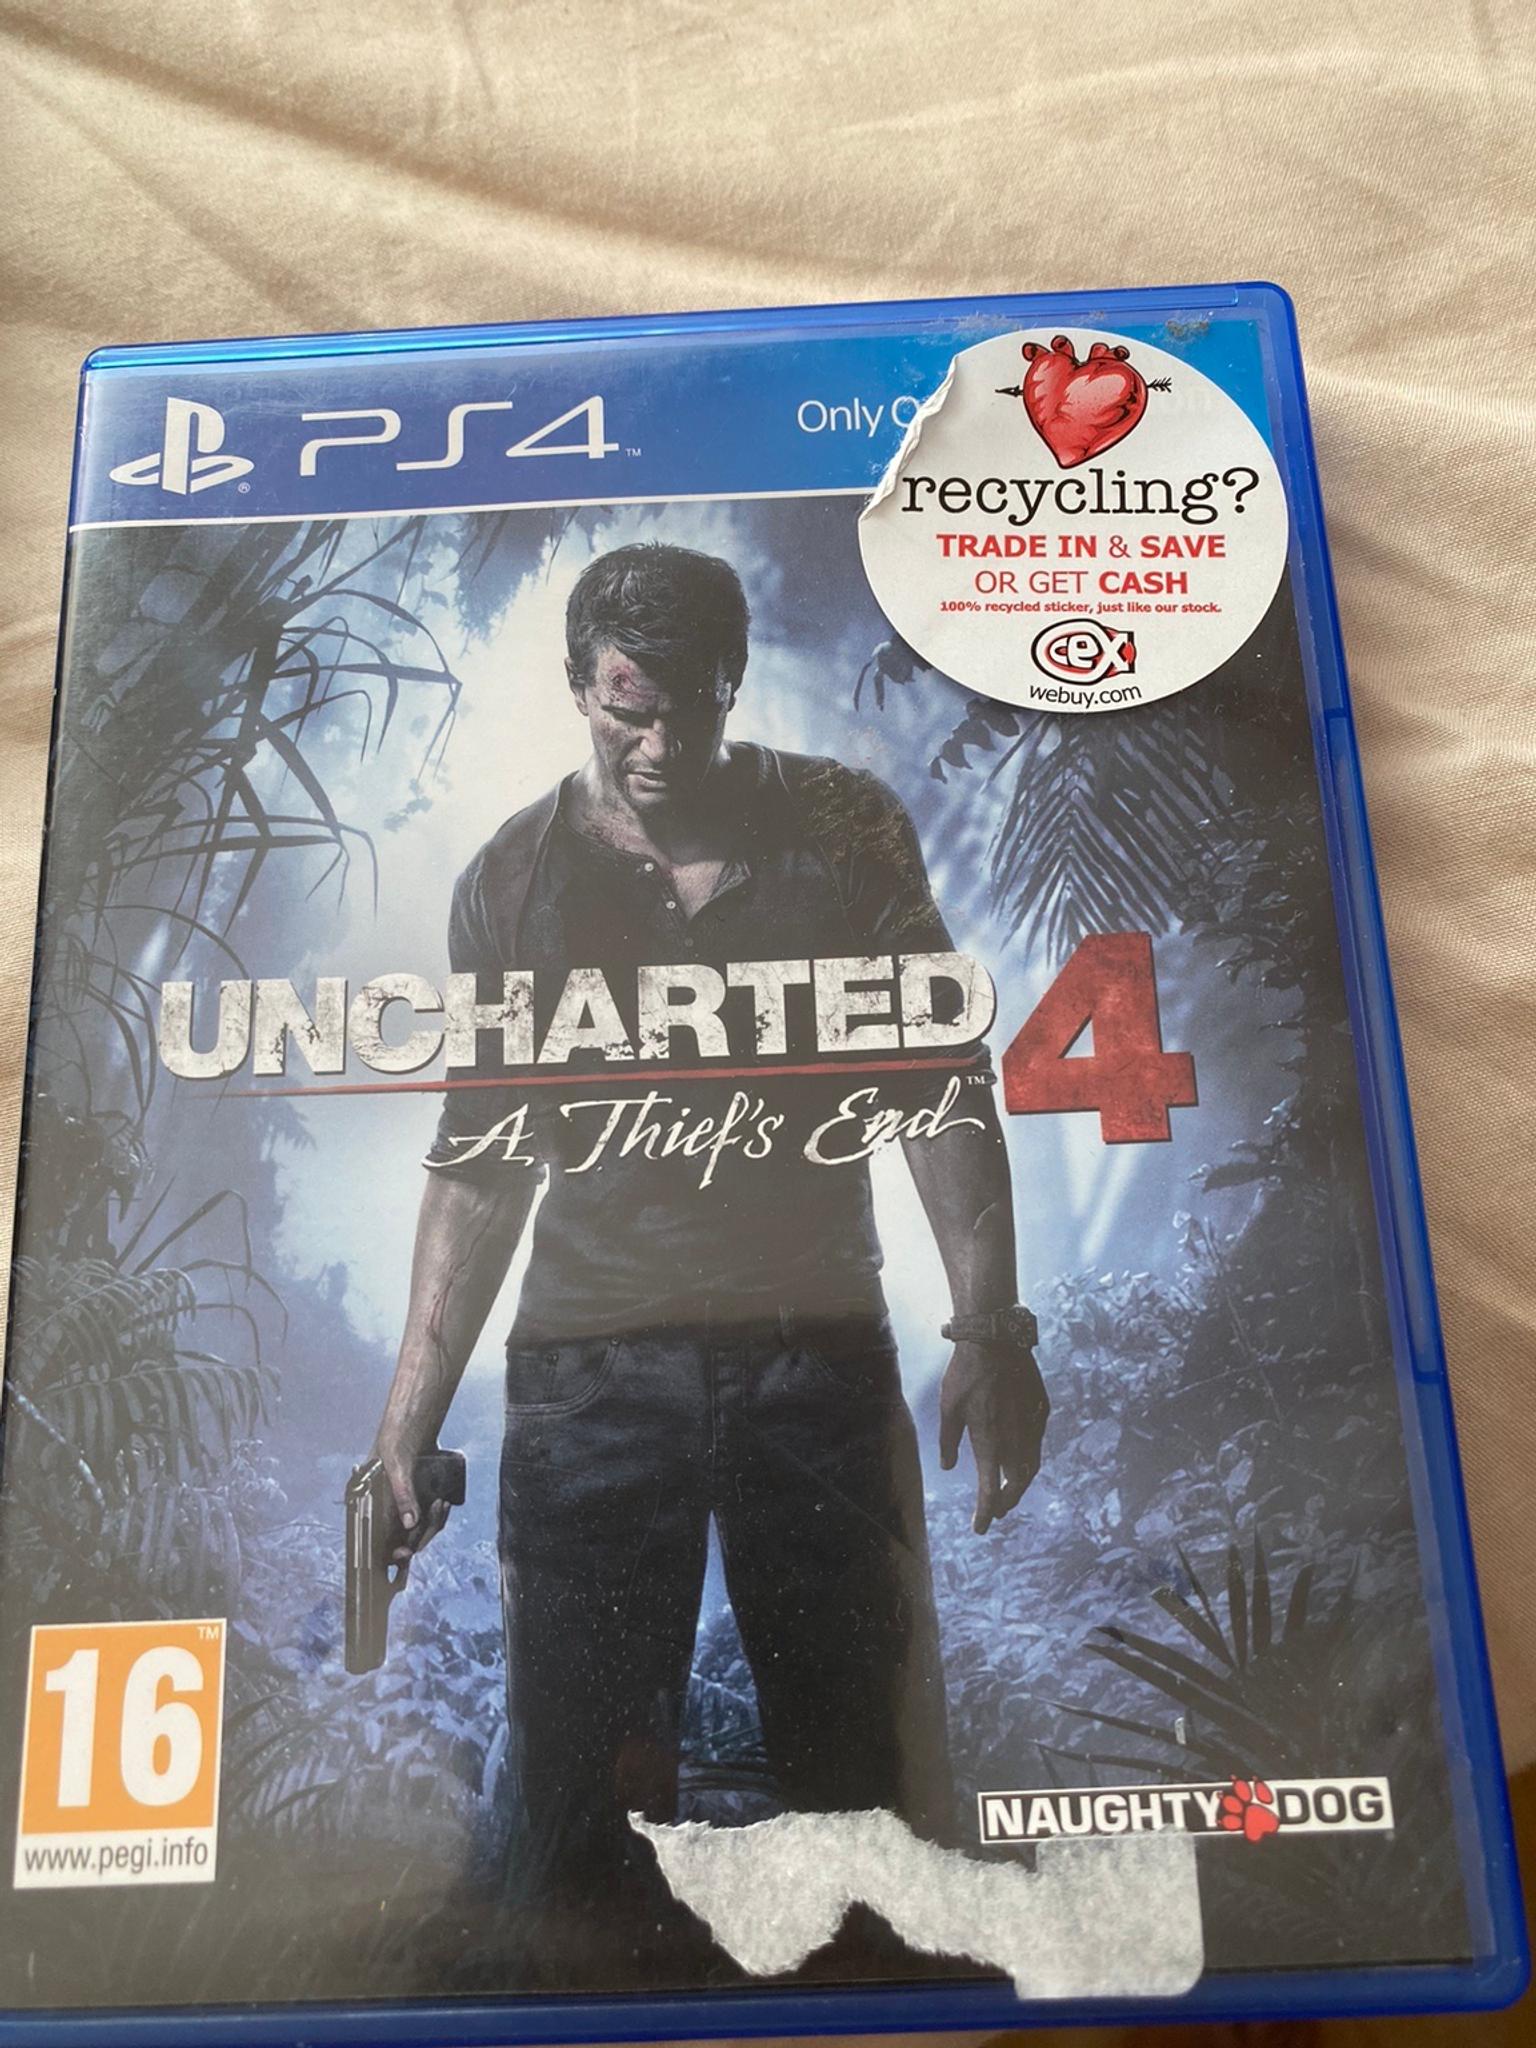 cex ps4 trade in